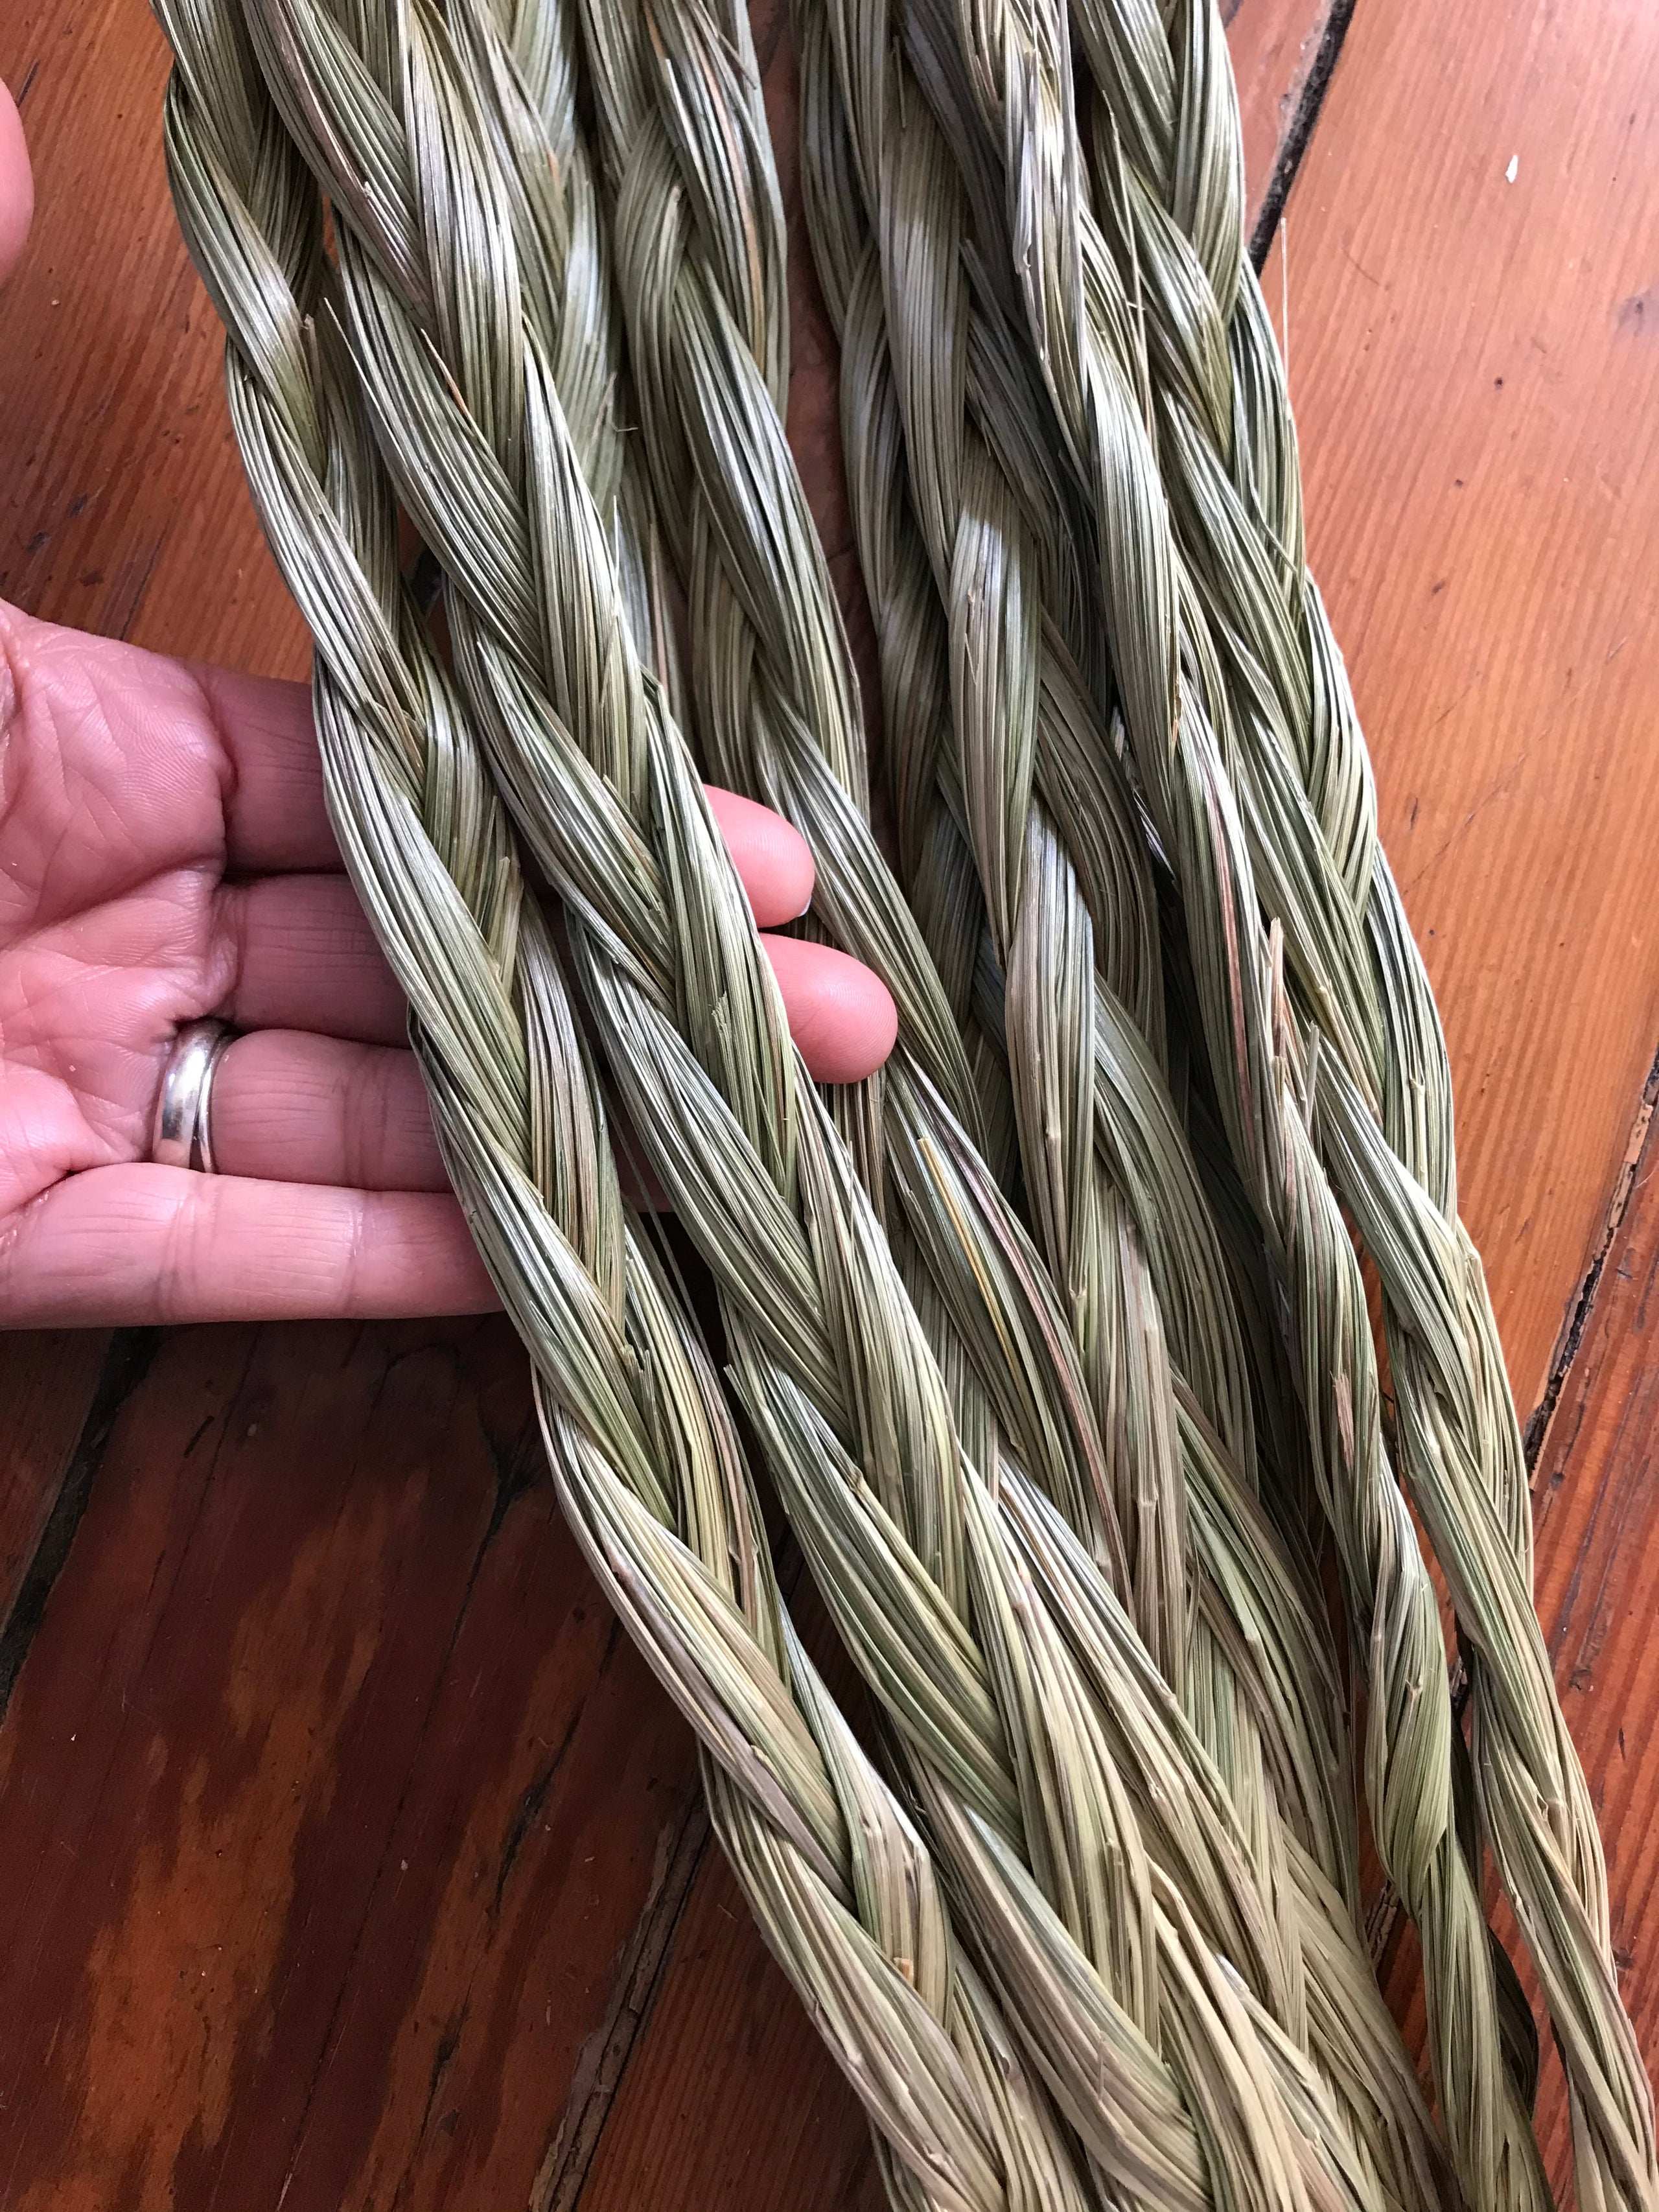 Native American Herbs Smudge, Extra large Sweet Grass Braids